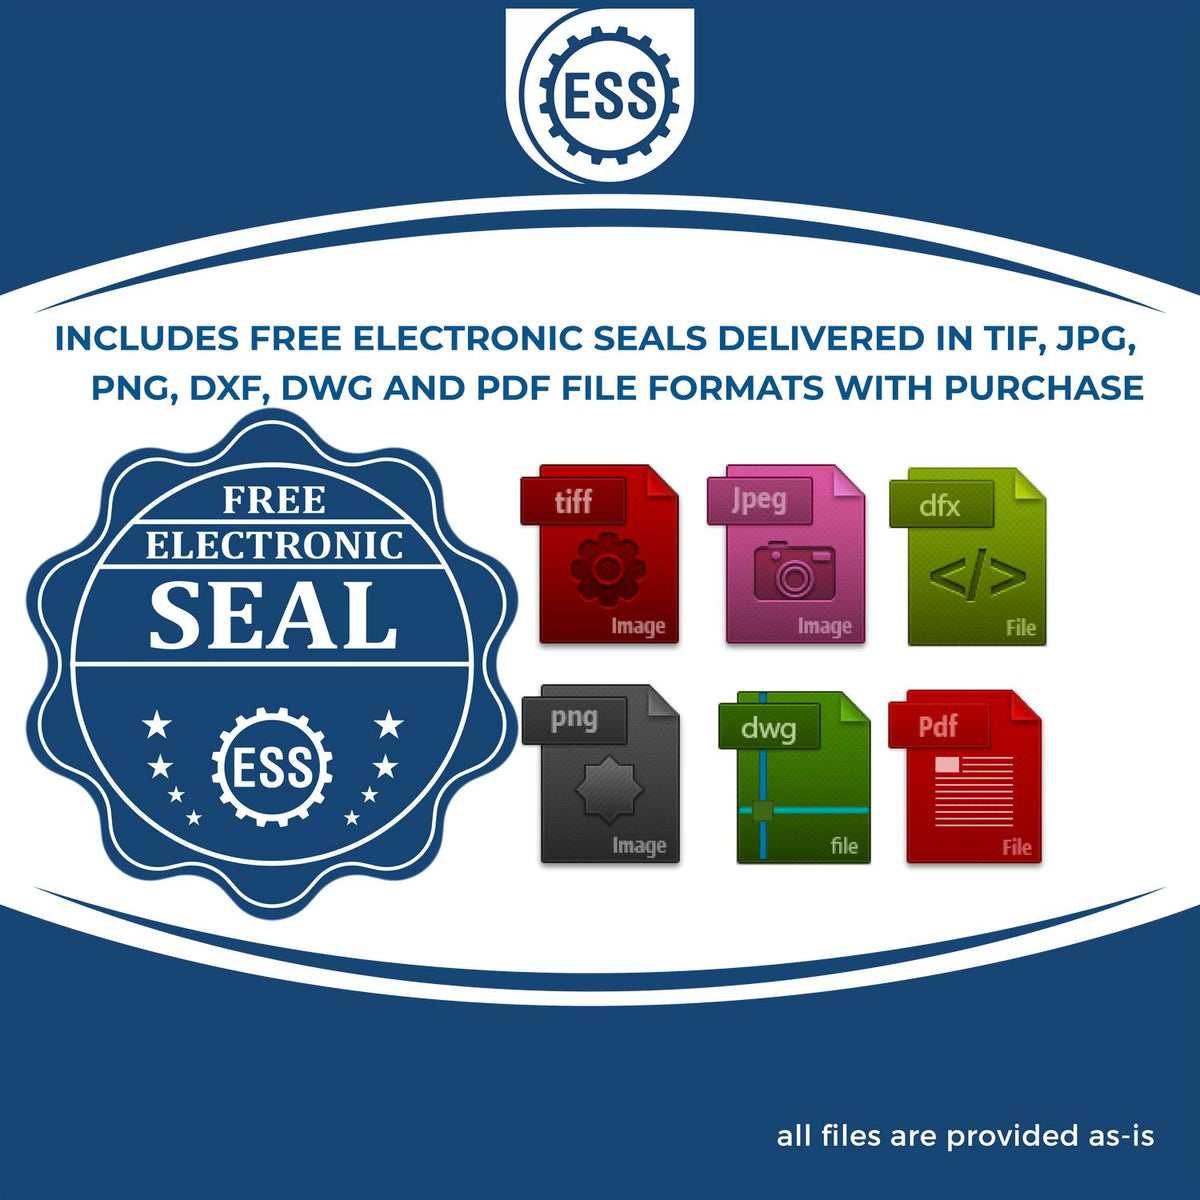 An infographic for the free electronic seal for the Long Reach North Dakota PE Seal illustrating the different file type icons such as DXF, DWG, TIF, JPG and PNG.